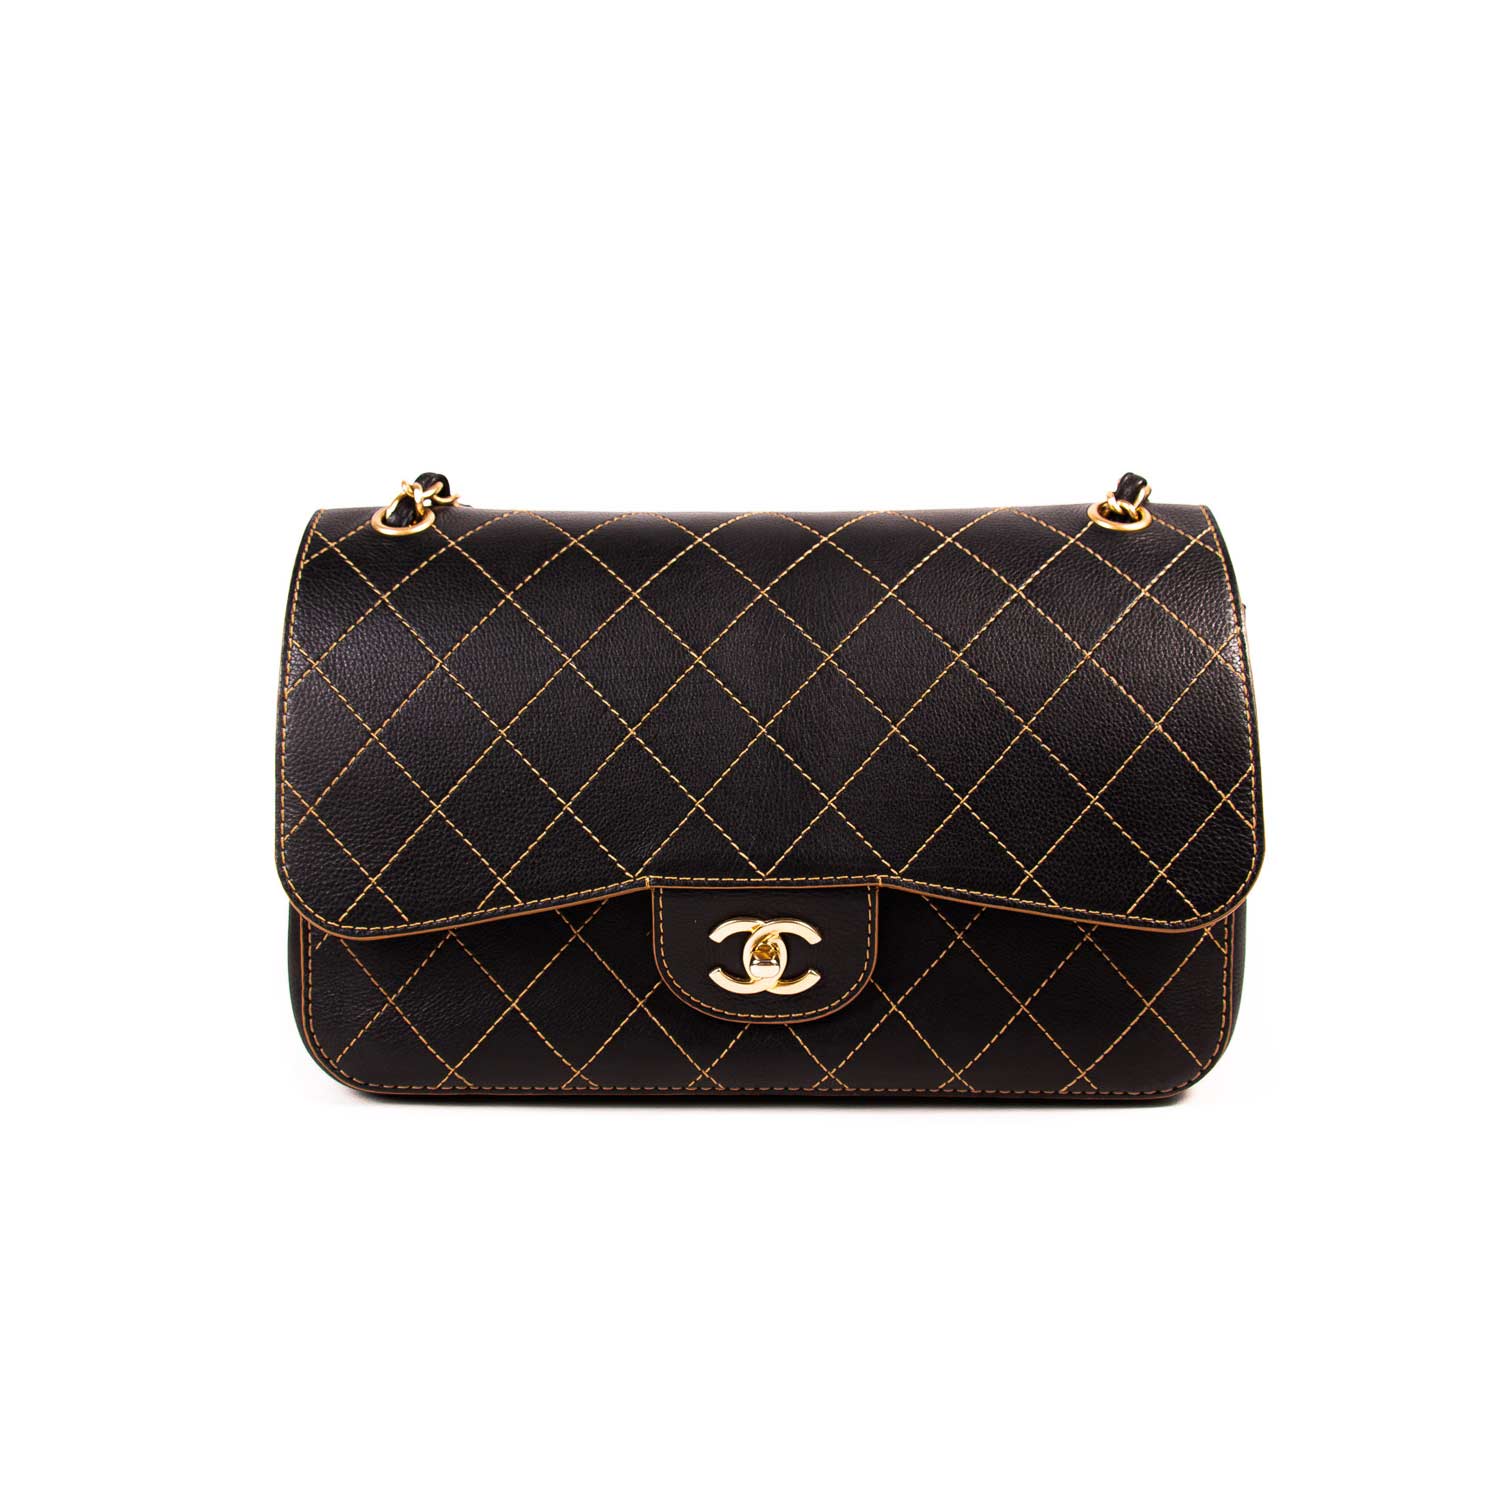 Shop authentic Chanel Classic Jumbo Double Flap Bag at revogue for just USD  3,500.00